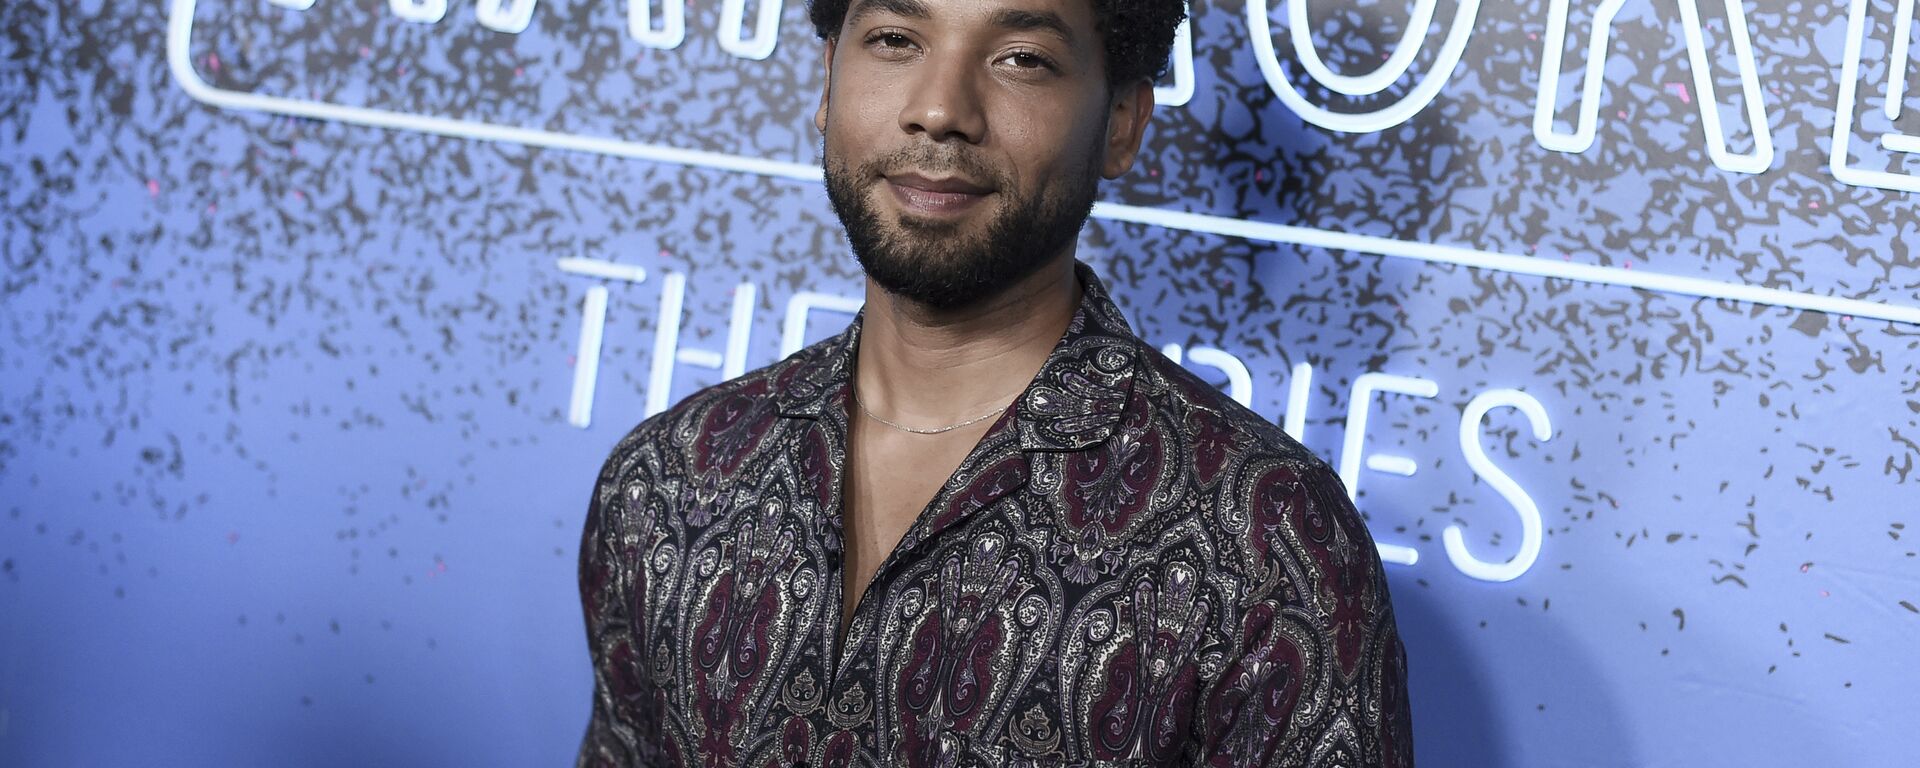 Jussie Smollett attends Carpool Karaoke: The Series launch event at the Chateau Marmont Hotel on Monday, Aug. 7, 2017, in Los Angeles.  - Sputnik International, 1920, 12.03.2022